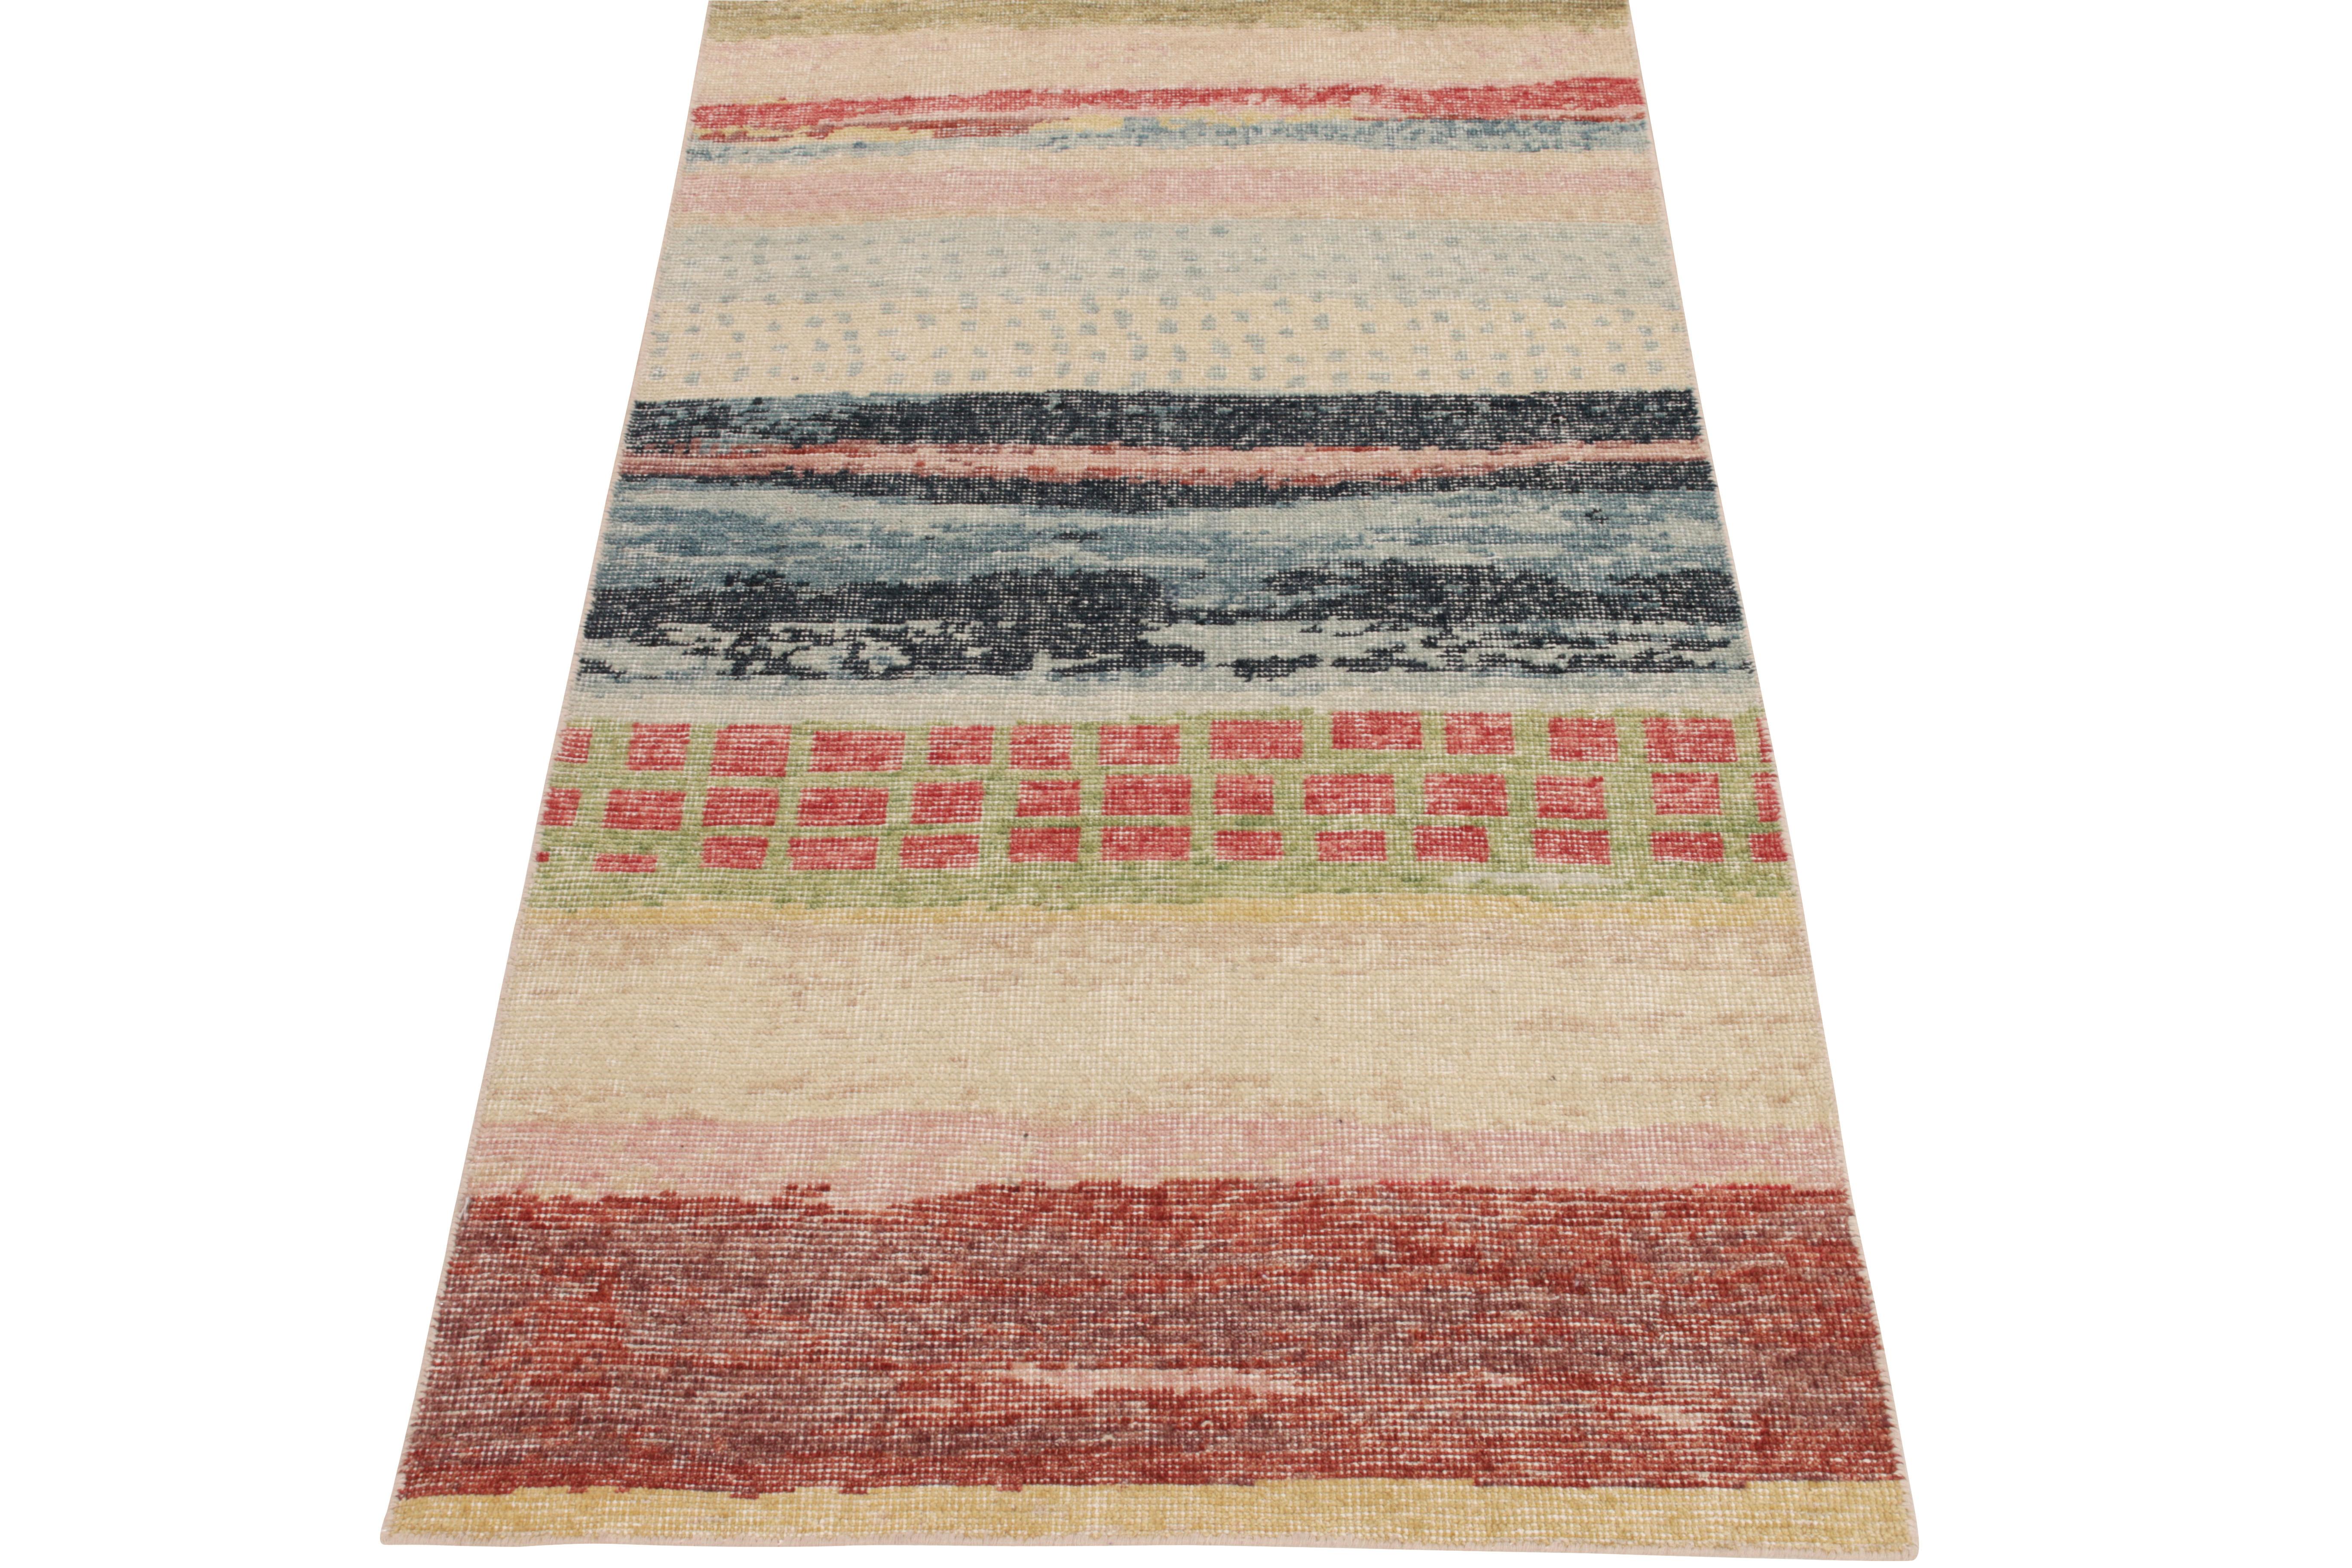 Hand-knotted in wool, a 3X6 runner from Rug & Kilim’s Homage collection showcasing impeccable pagination in an enticing color play of variegated shades in blue, red, green & pastel pink uniquely complementing the distressed vibe of this line.